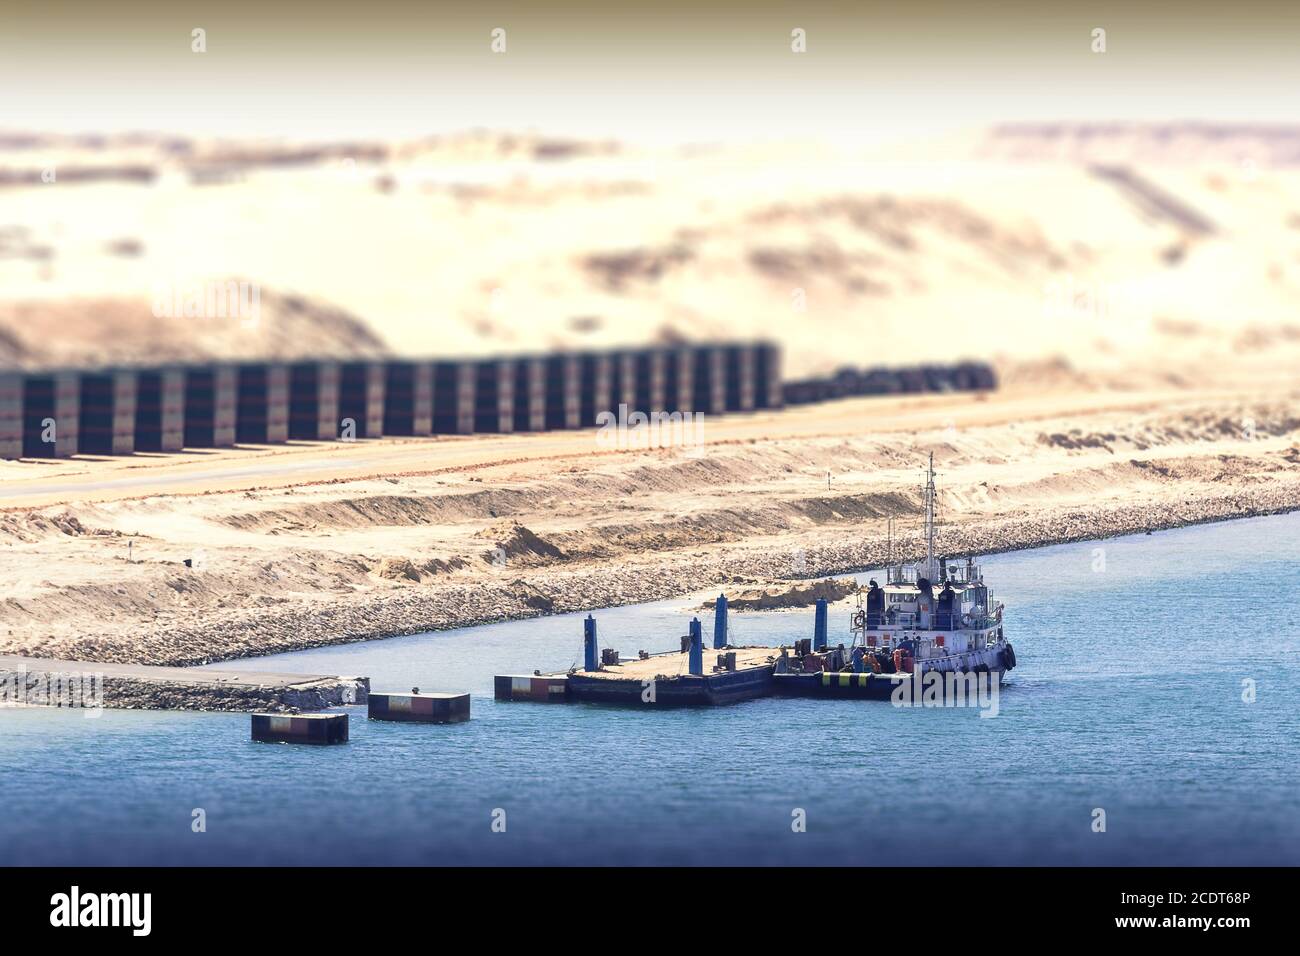 Construction work with work ship in the new extension channel of the Suez Canal Stock Photo